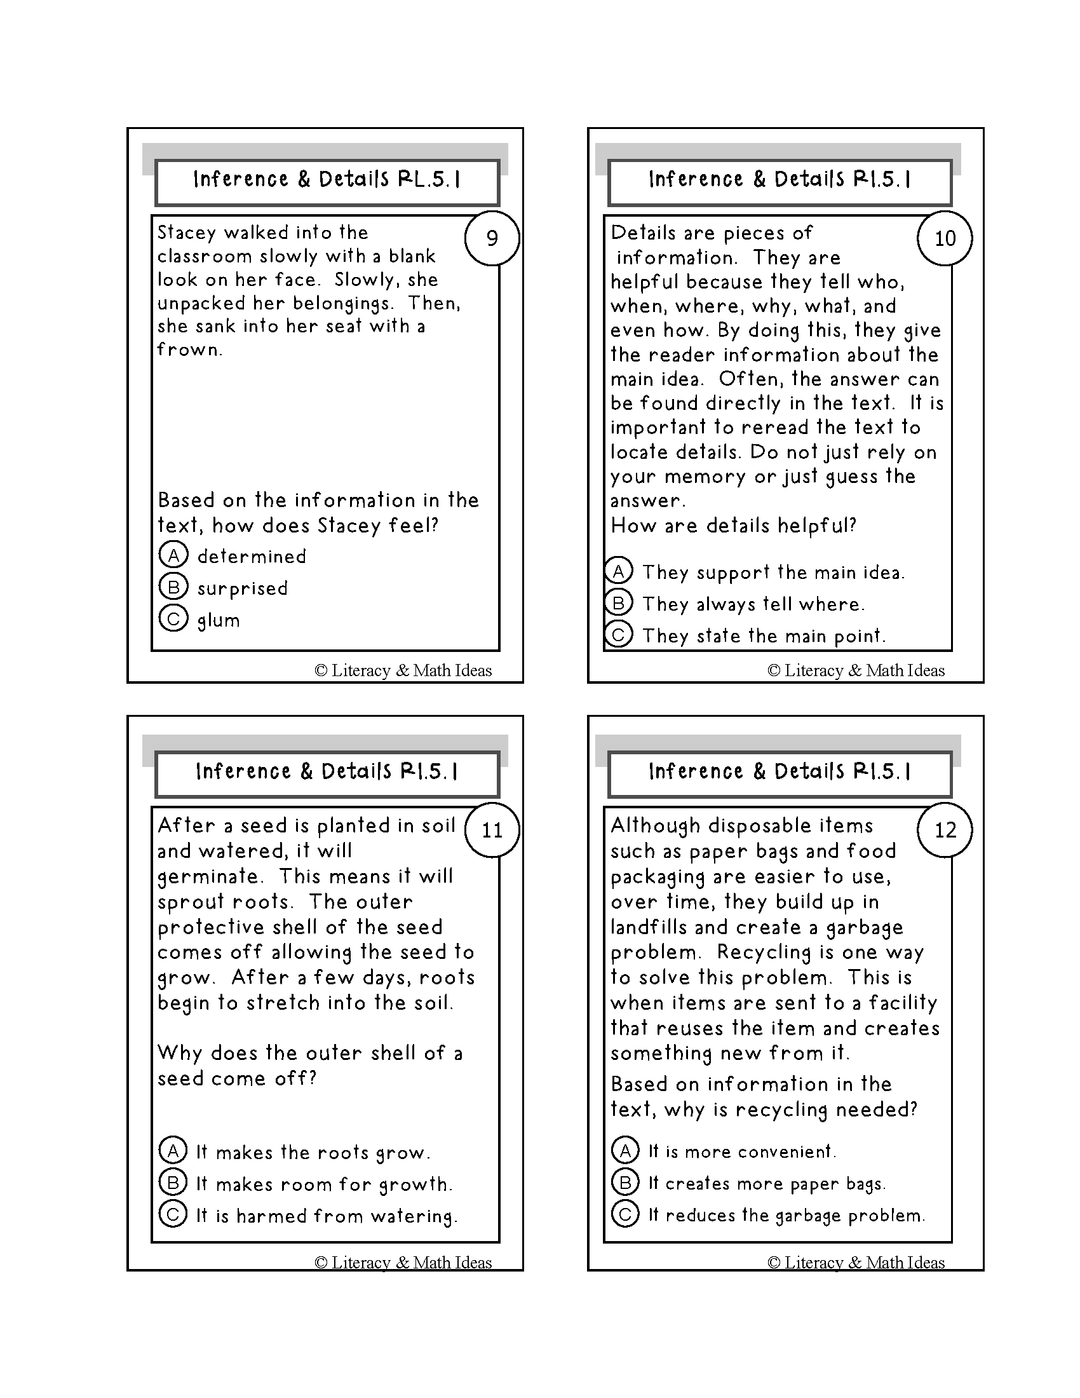 Inference & Details Grade 5 Common Core RL.5.1 and RI.5.1 Cards